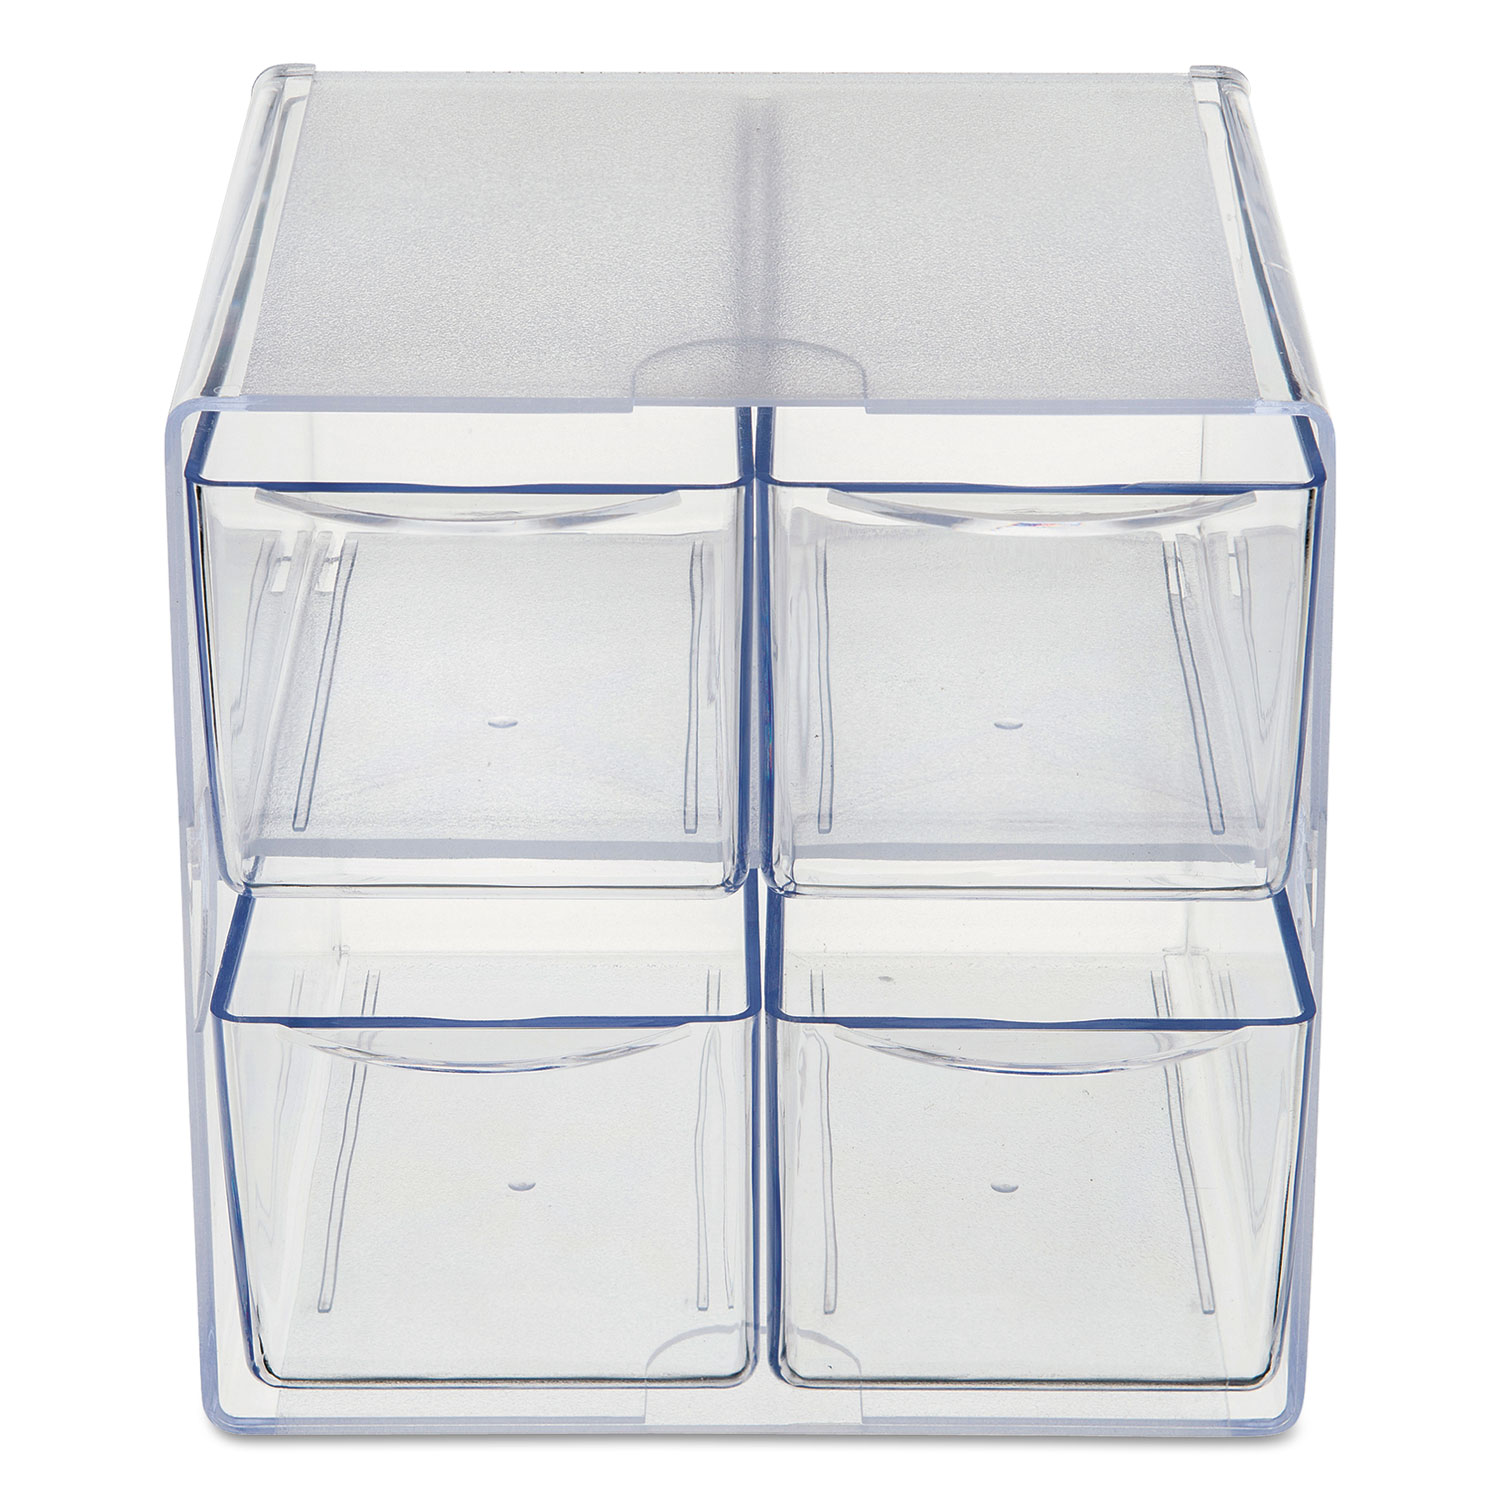 Stackable Cube Organizer, 4 Drawers, 6 x 7 1/8 x 6, Clear - BOSS Office